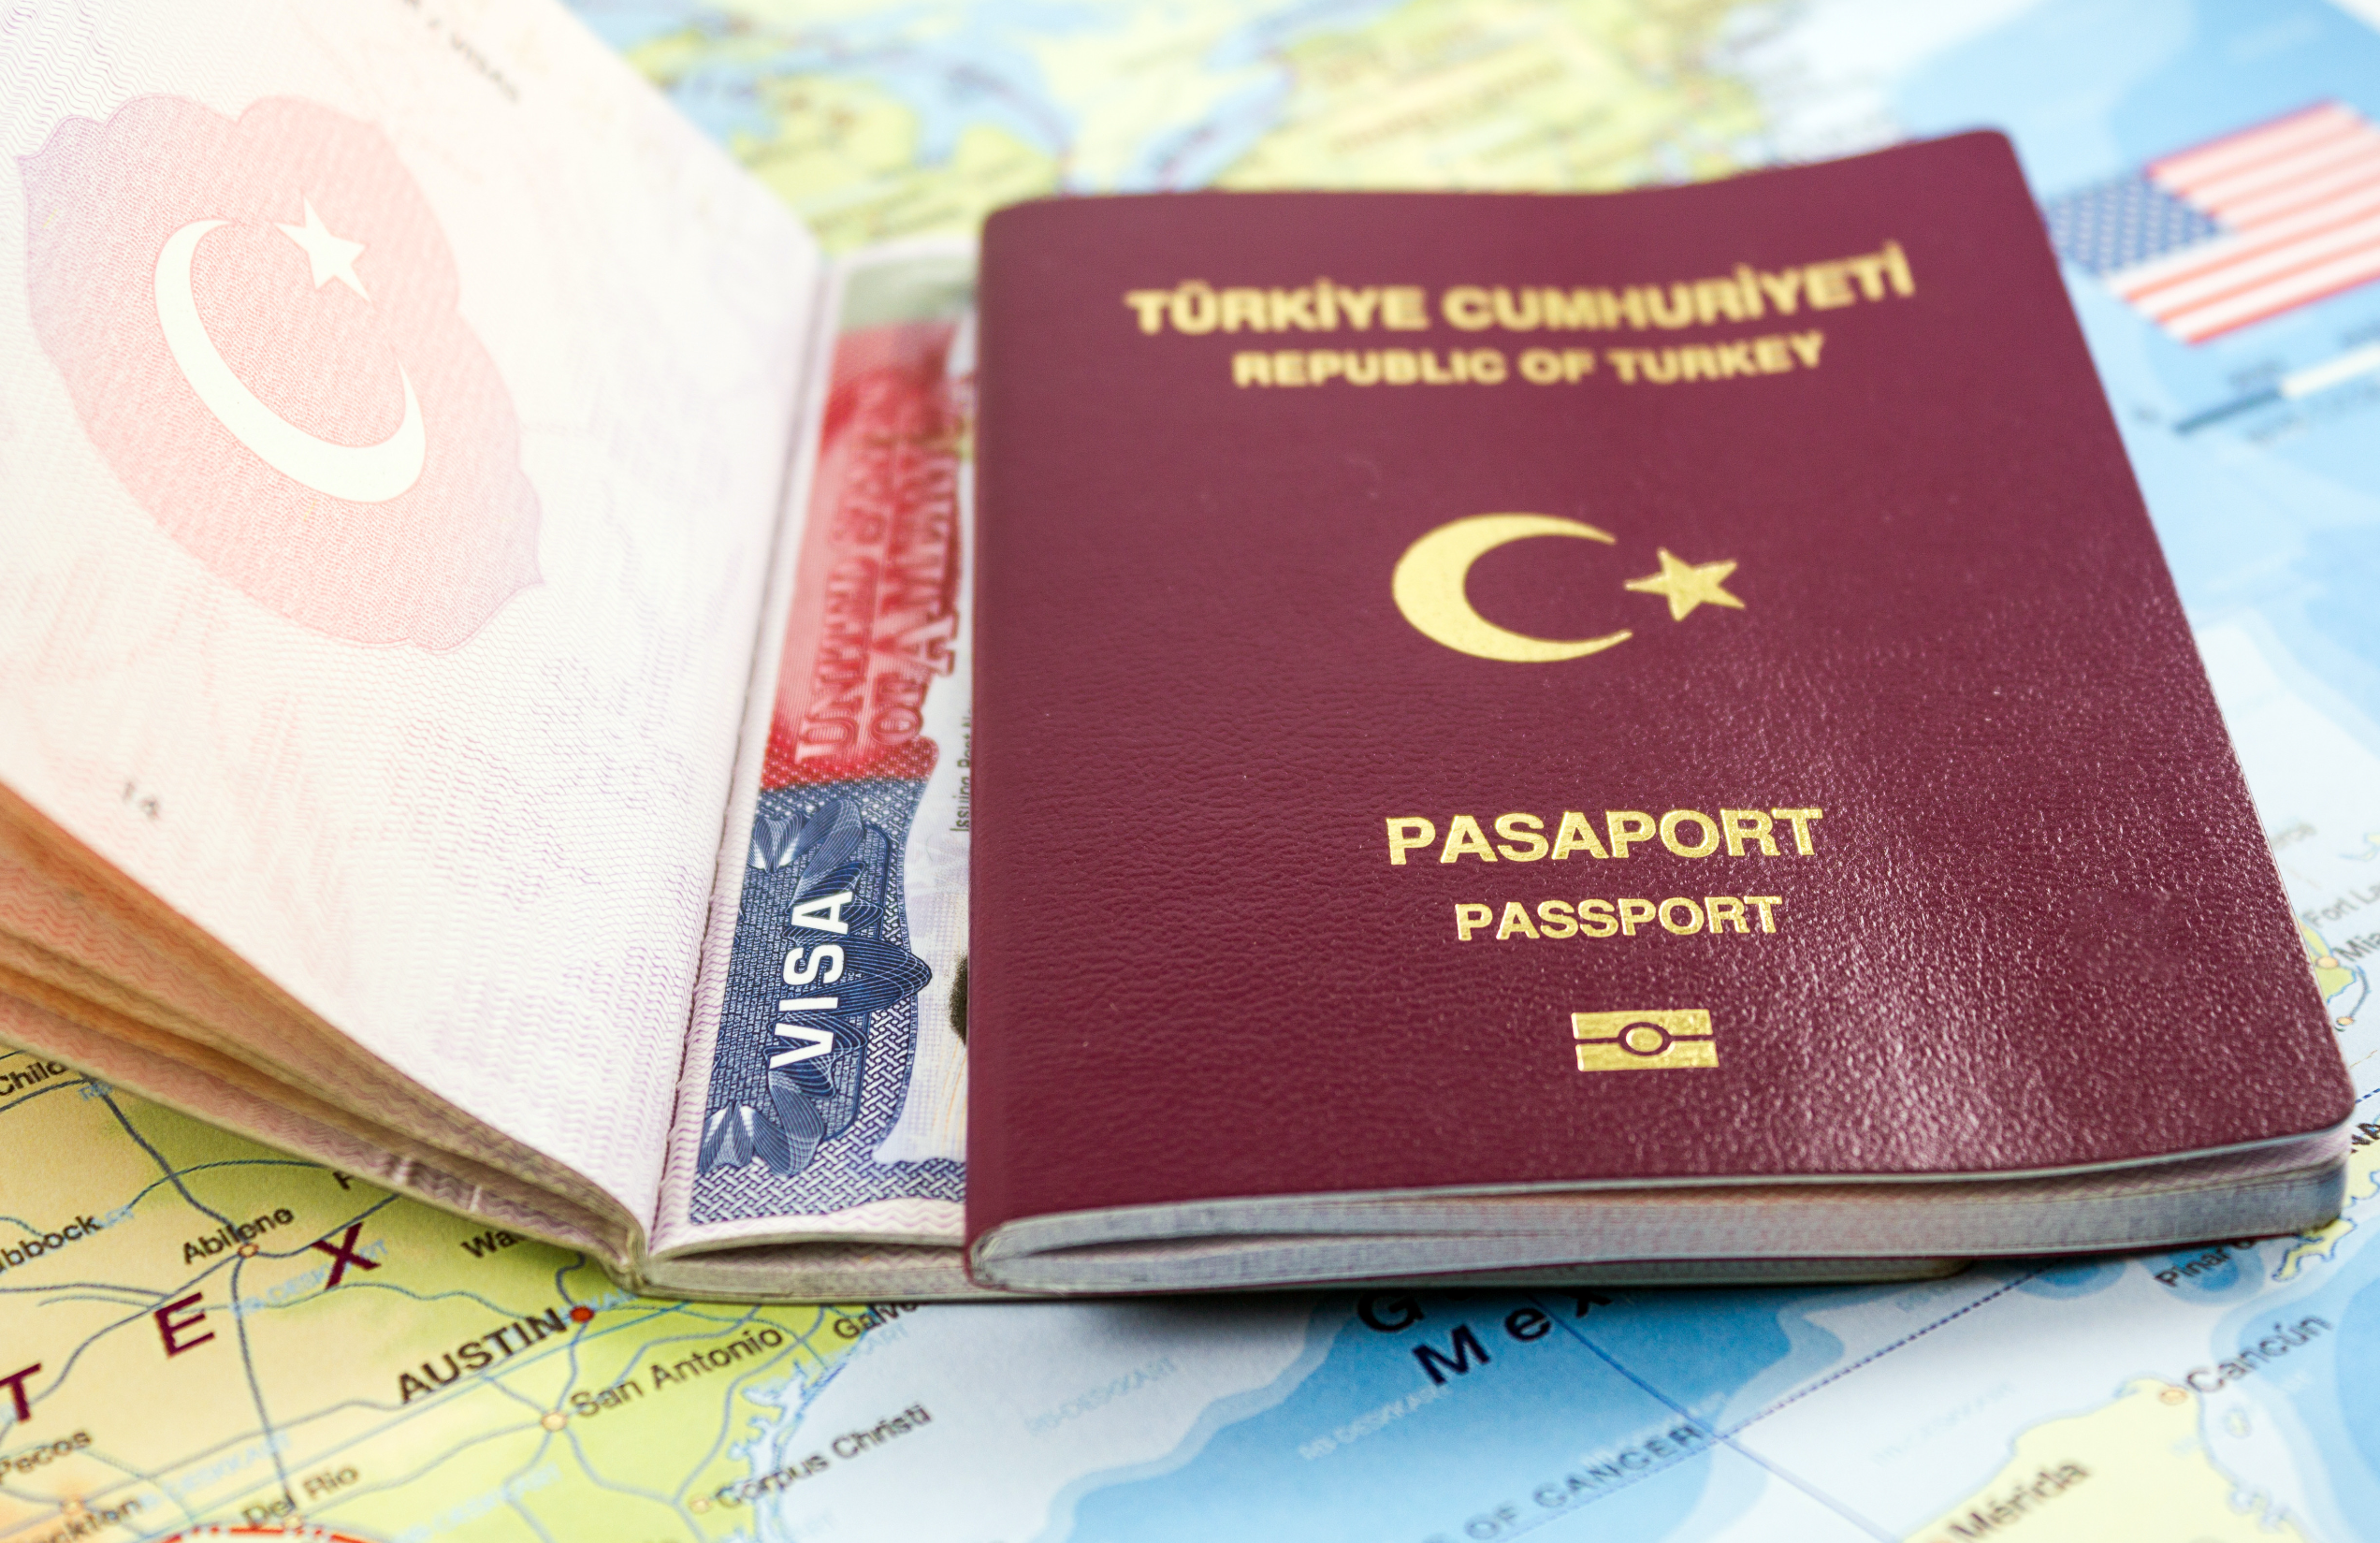 Istanbul Airport Sets Visa Requirements for Transit Visitors from 10 Nations